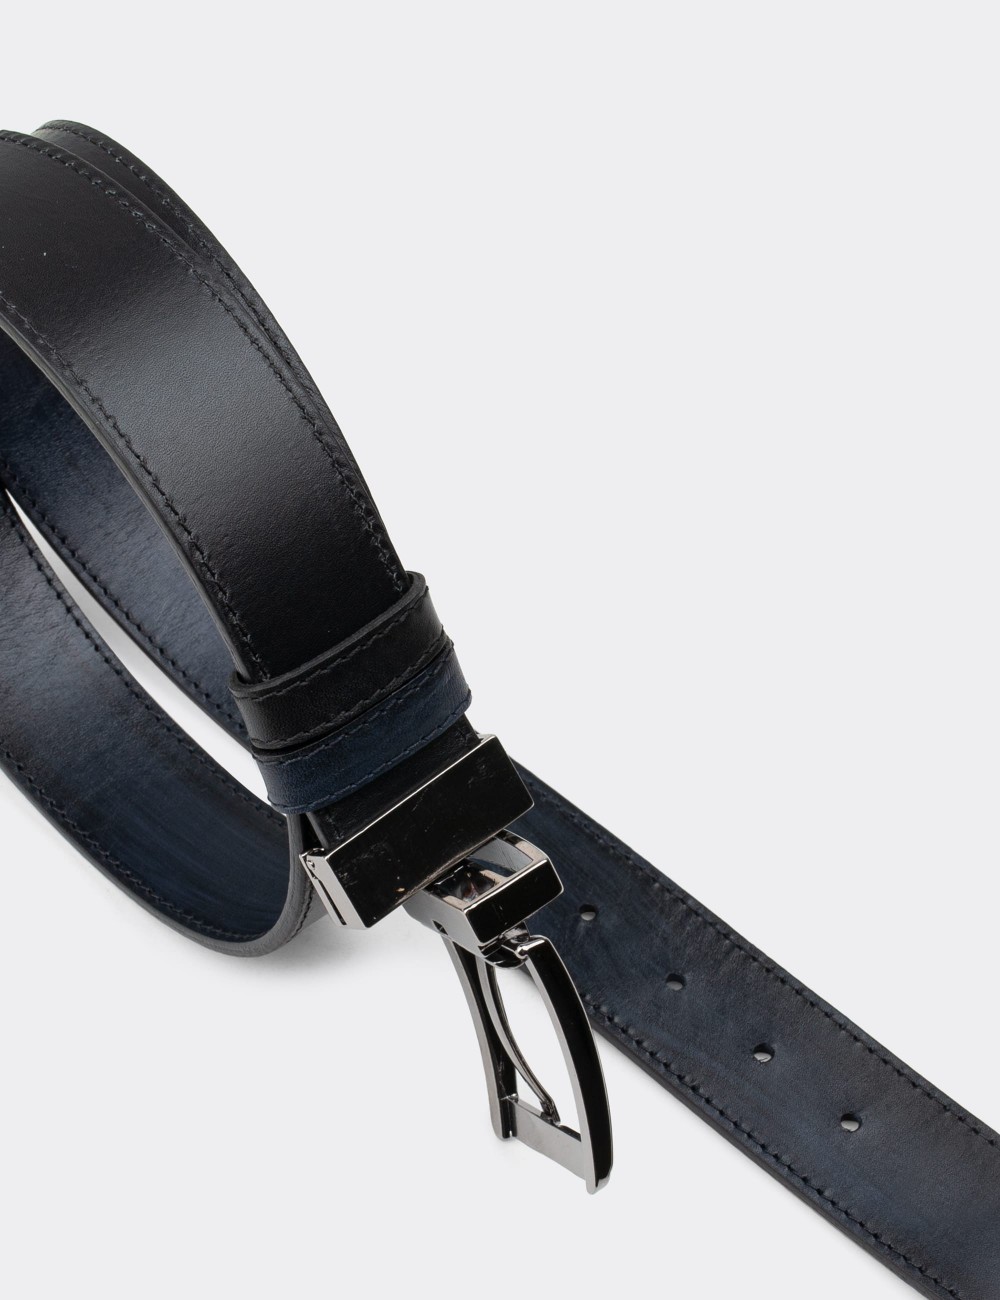  Leather Navy and Black Double Sided Men's Belt - K0409MLCVW01